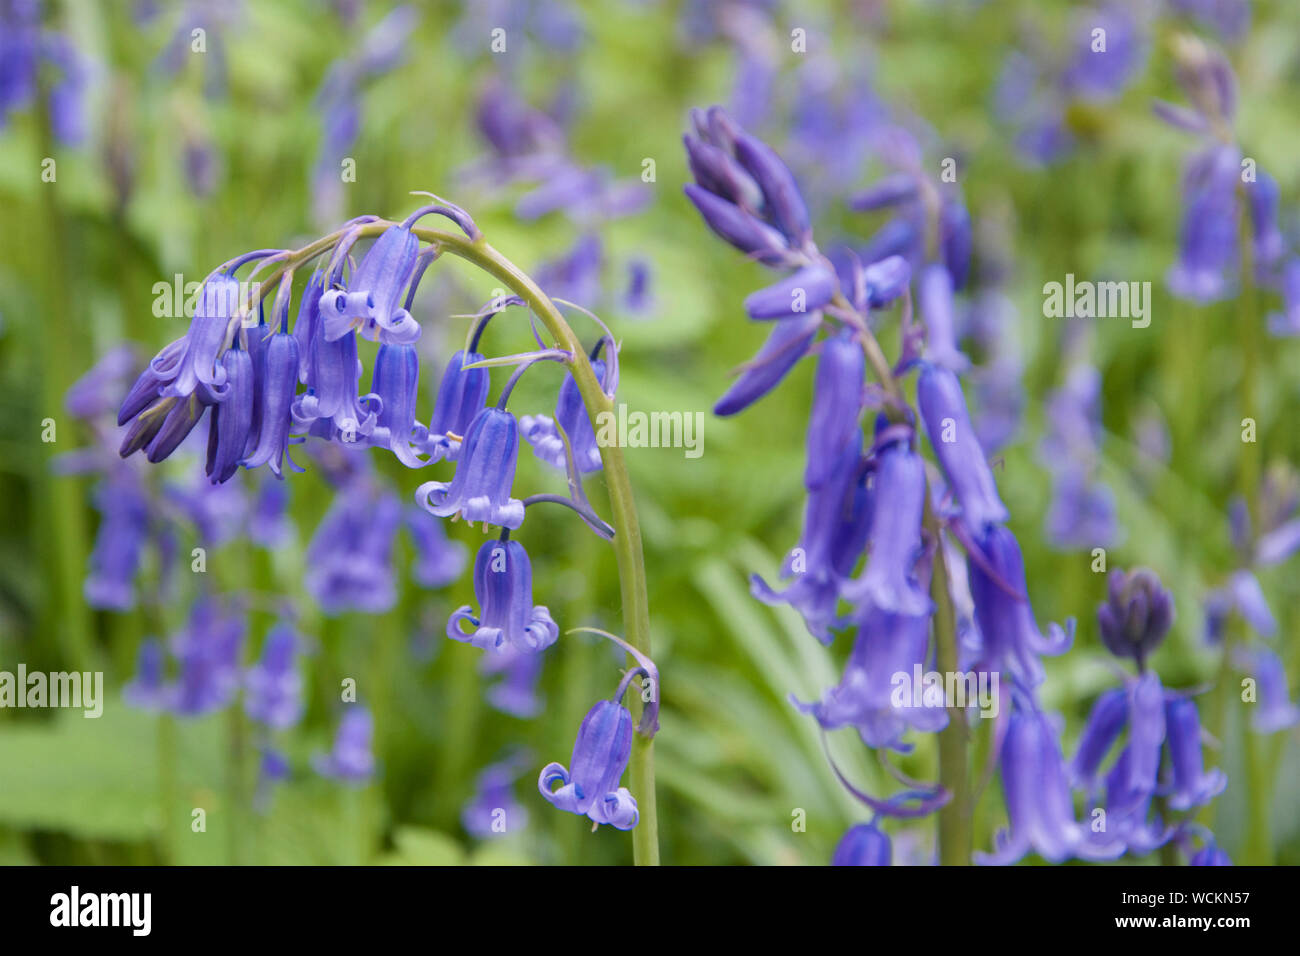 Bluebells in early flower. Stock Photo